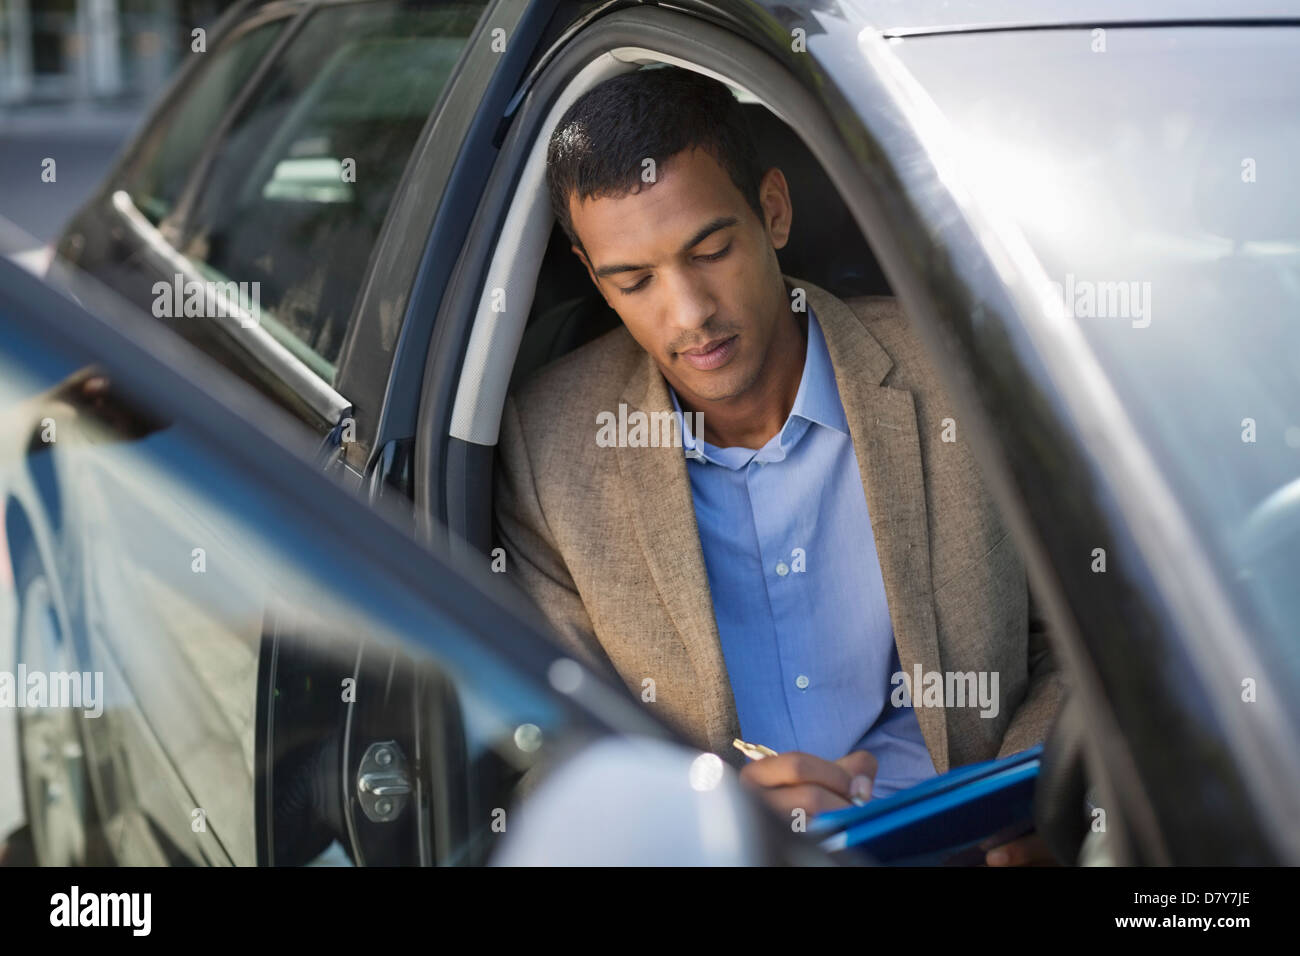 Businessman working in car Stock Photo